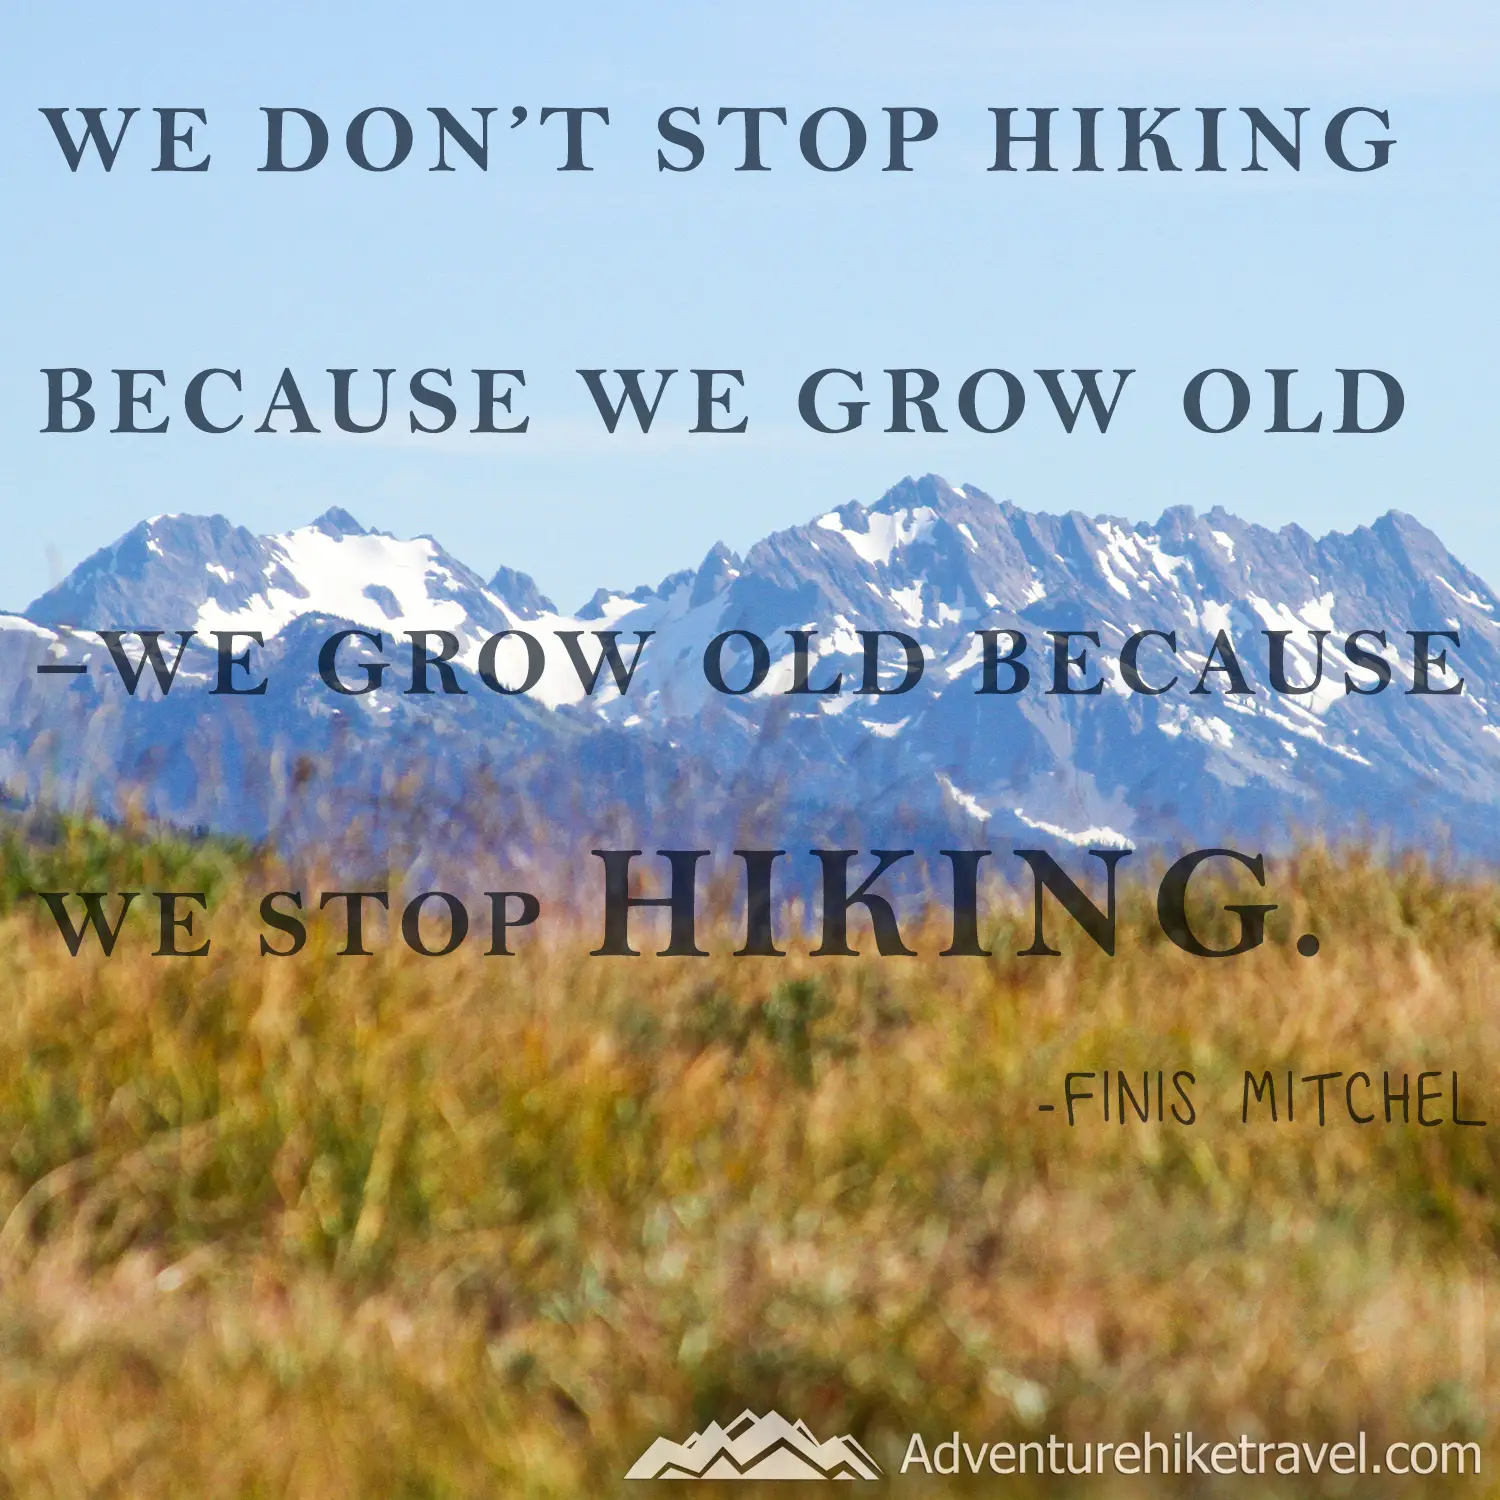 We don't stop hiking because we grow old - we grow old because we stop hiking. -Finis Mitchel #hiking #quotes #inspirationalquotes #hikingquotes #adventurequotes #outdoors #trekking